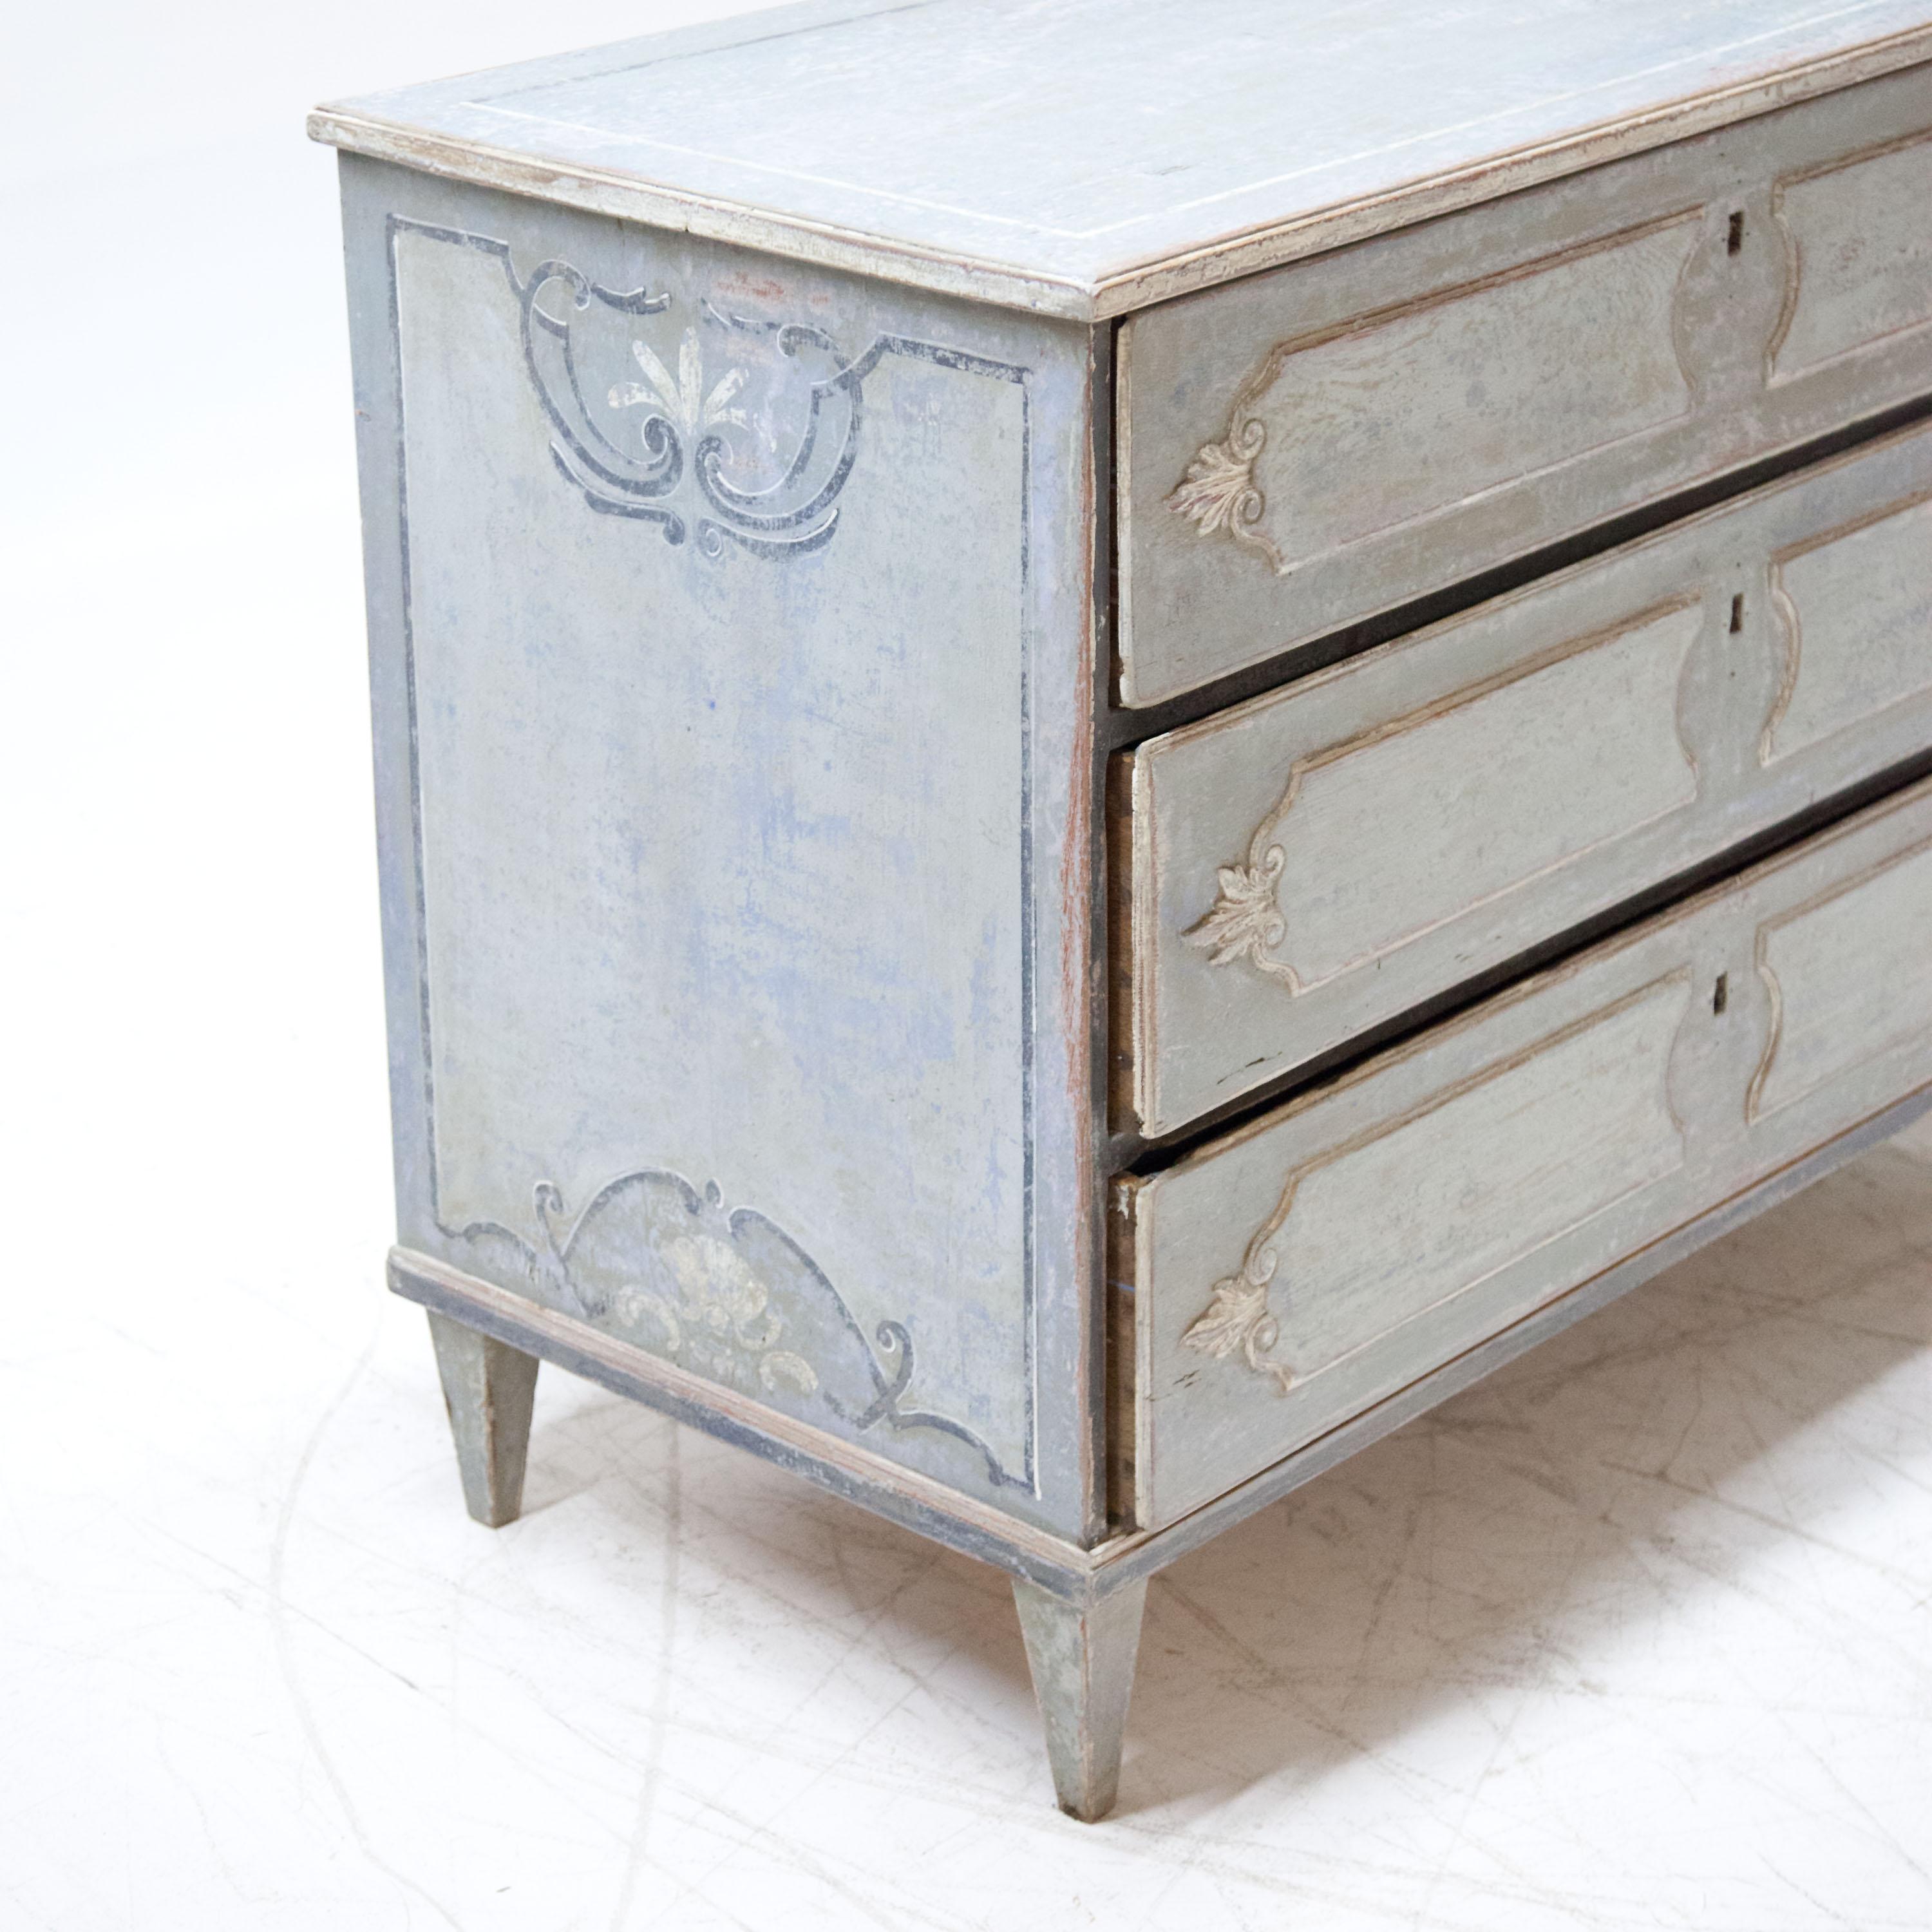 Chest of drawers with three drawers standing on square tapered feet. The body with blue setting with ribbon work and rocaille motifs. The drawers with filling-shaped curved cartouches. The setting is new and made according to historical motifs.